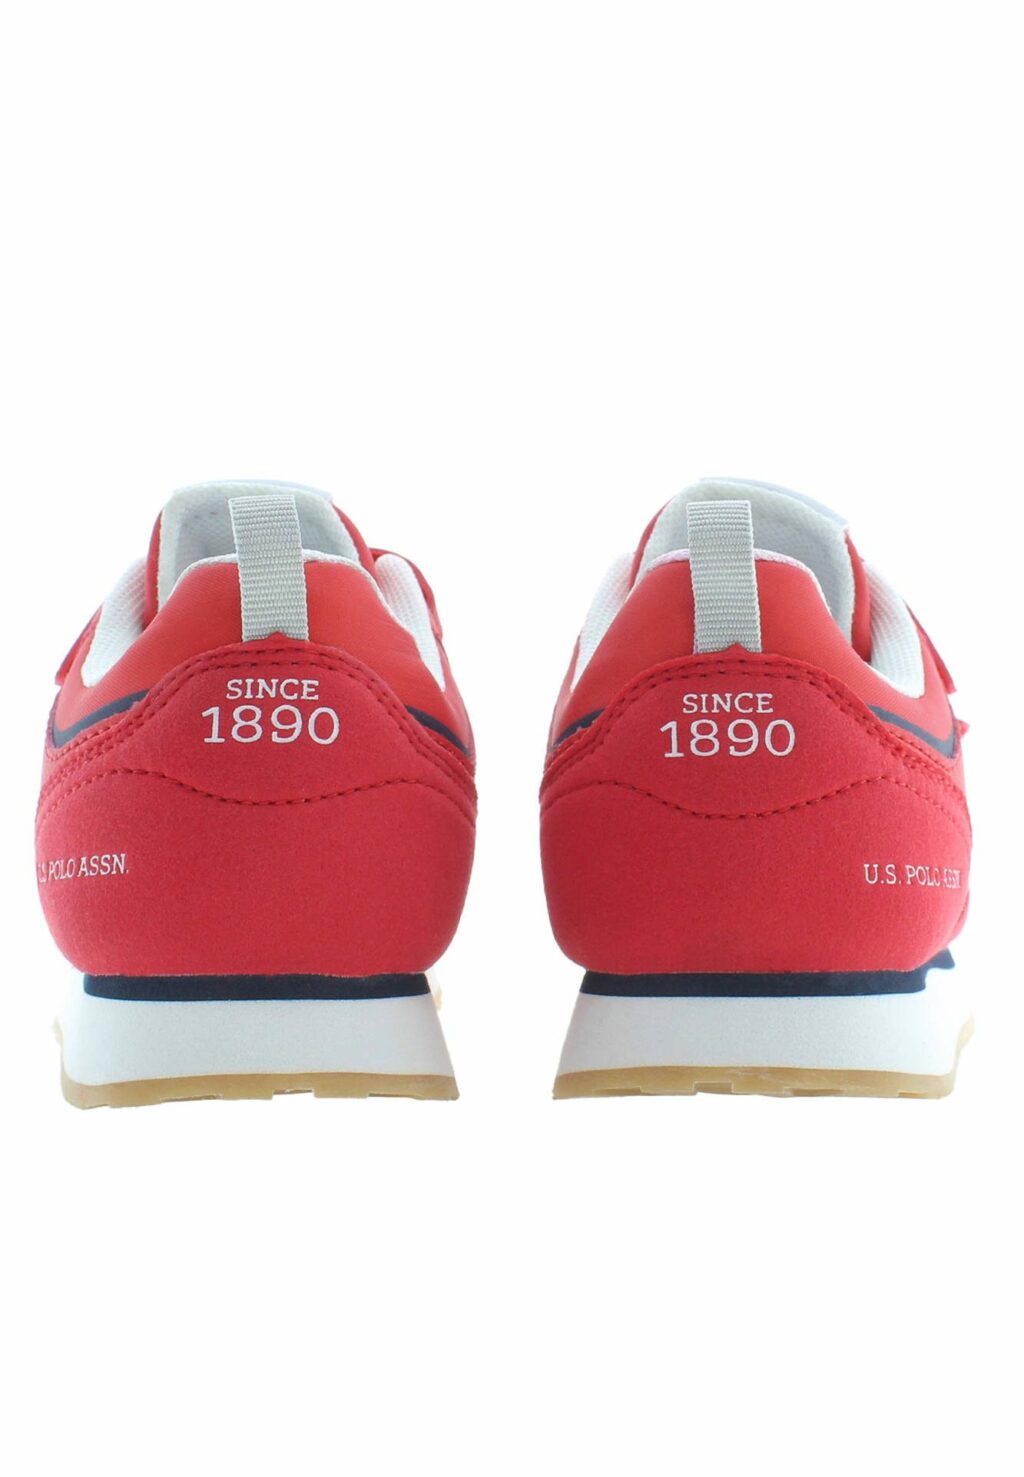 US POLO BEST PRICE RED SPORTS SHOES FOR KIDS NOBIK009K3NH1_ROSSO_RED-DBL02